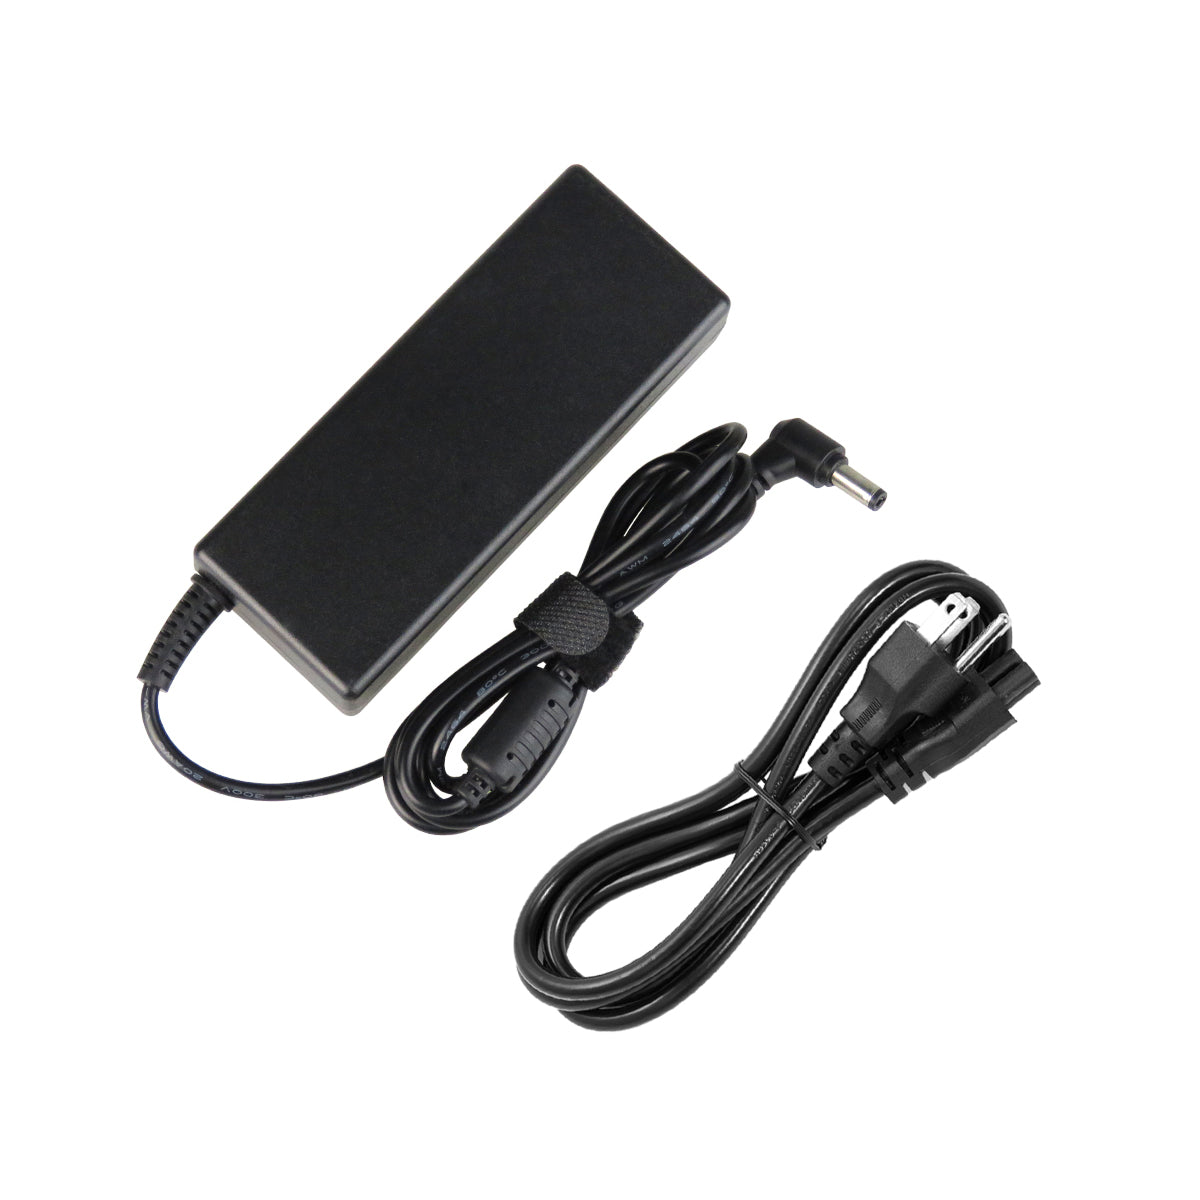 AC Adapter Charger for Toshiba Satellite s55t-a5334 Notebook.